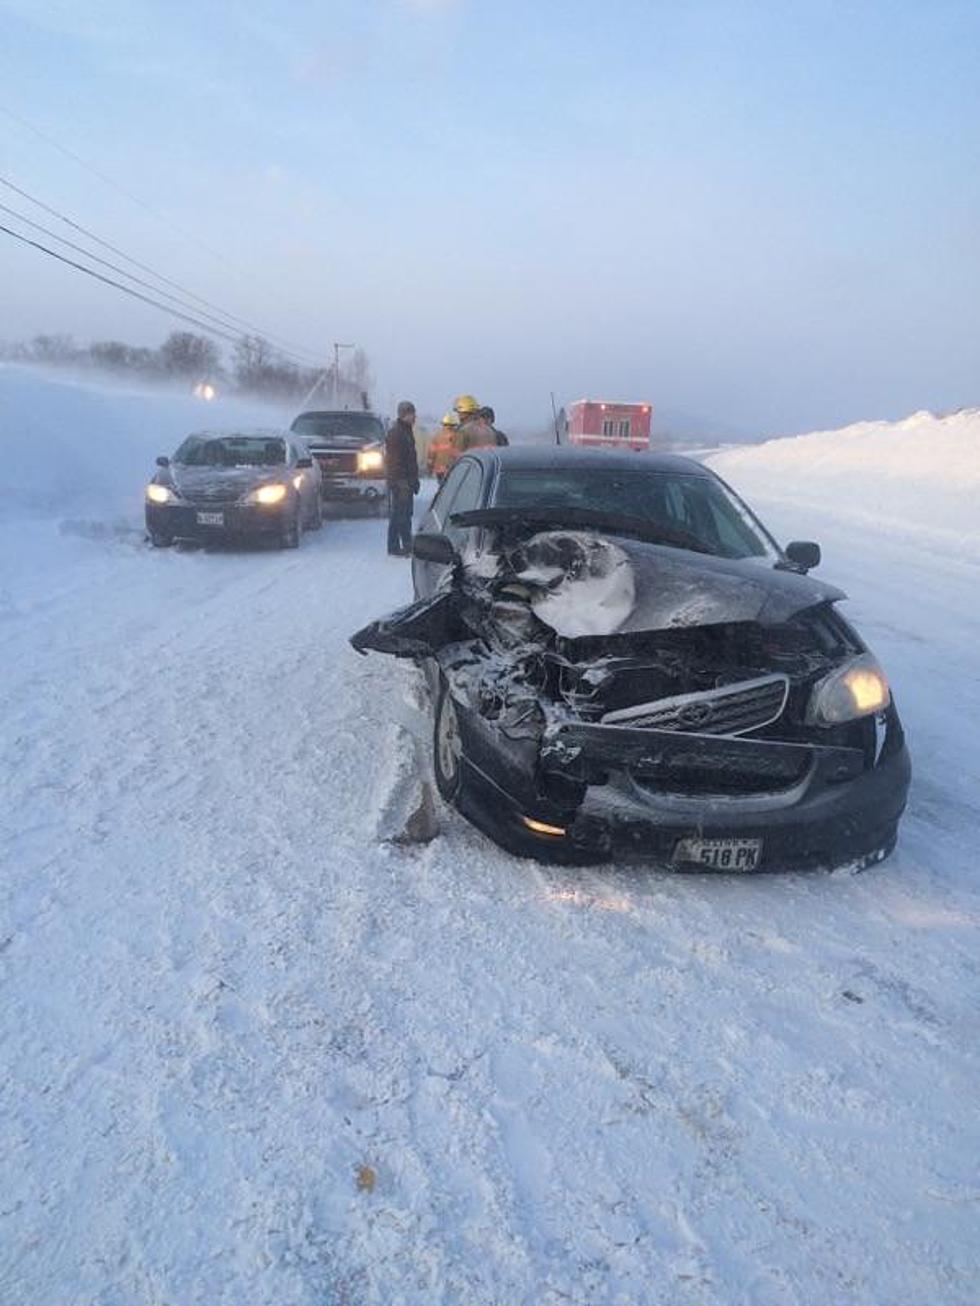 Five Injured in Whiteout